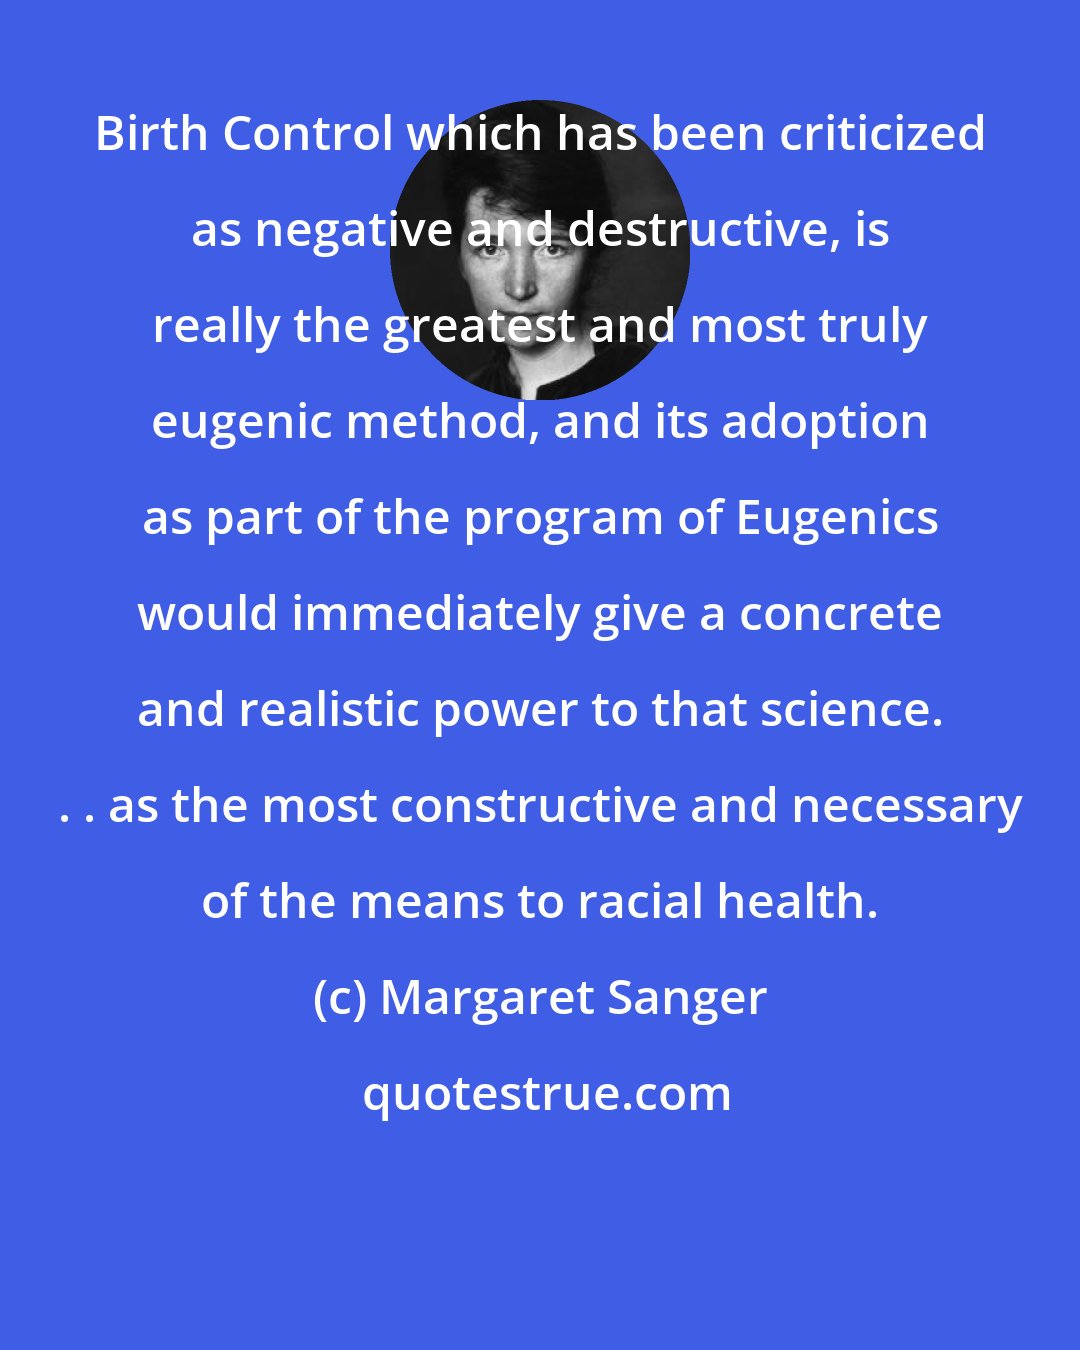 Margaret Sanger: Birth Control which has been criticized as negative and destructive, is really the greatest and most truly eugenic method, and its adoption as part of the program of Eugenics would immediately give a concrete and realistic power to that science. . . as the most constructive and necessary of the means to racial health.